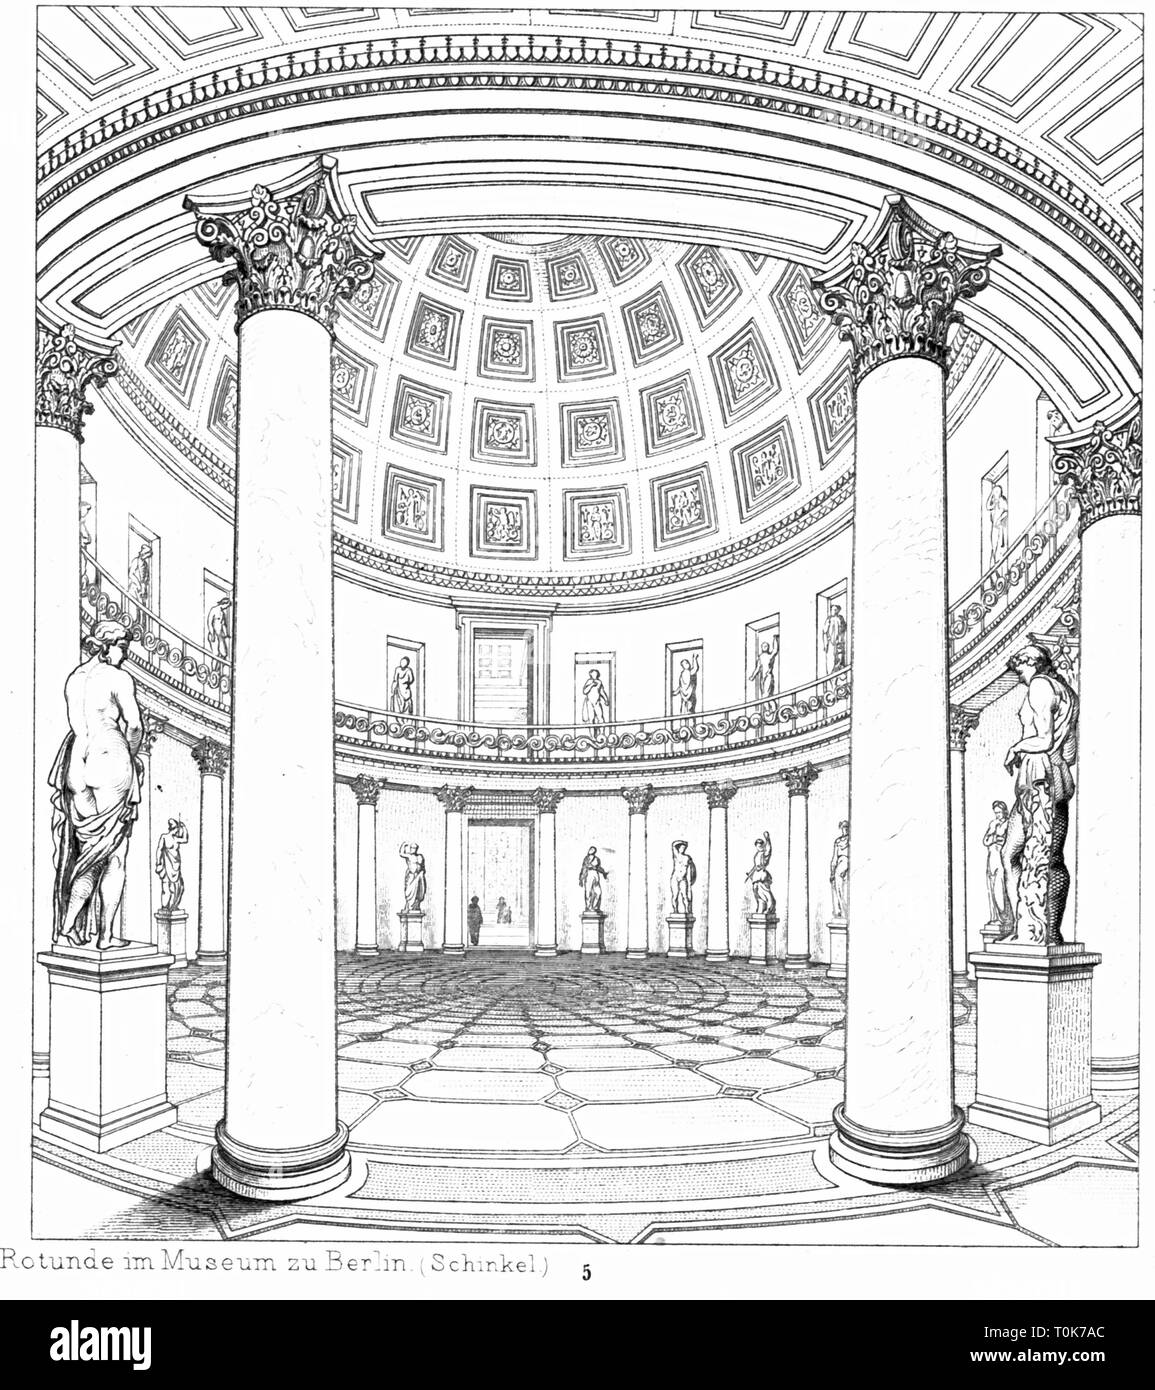 geography / travel, Germany, Berlin, Altes Museum (Old Museum), built 1825 - 1828, architect: Karl Friedrich Schinkel, interior view, rotunda, illustration from 'Denkmaeler der Kunst' (Monuments of Art), by Wilhelm Luebke and Carl von Luetzow, 3rd edition, Stuttgart 1879, volume 2, steel engraving by H. Gugeler, after drawing by Wilhelm Riefstahl, chapter on architecture, plate LI, 19th century, historic, historical, classicism, classical, classic, Museum Island, UNESCO World Cultural Heritage Site, world heritage, world heritage list, world heri, Additional-Rights-Clearance-Info-Not-Available Stock Photo